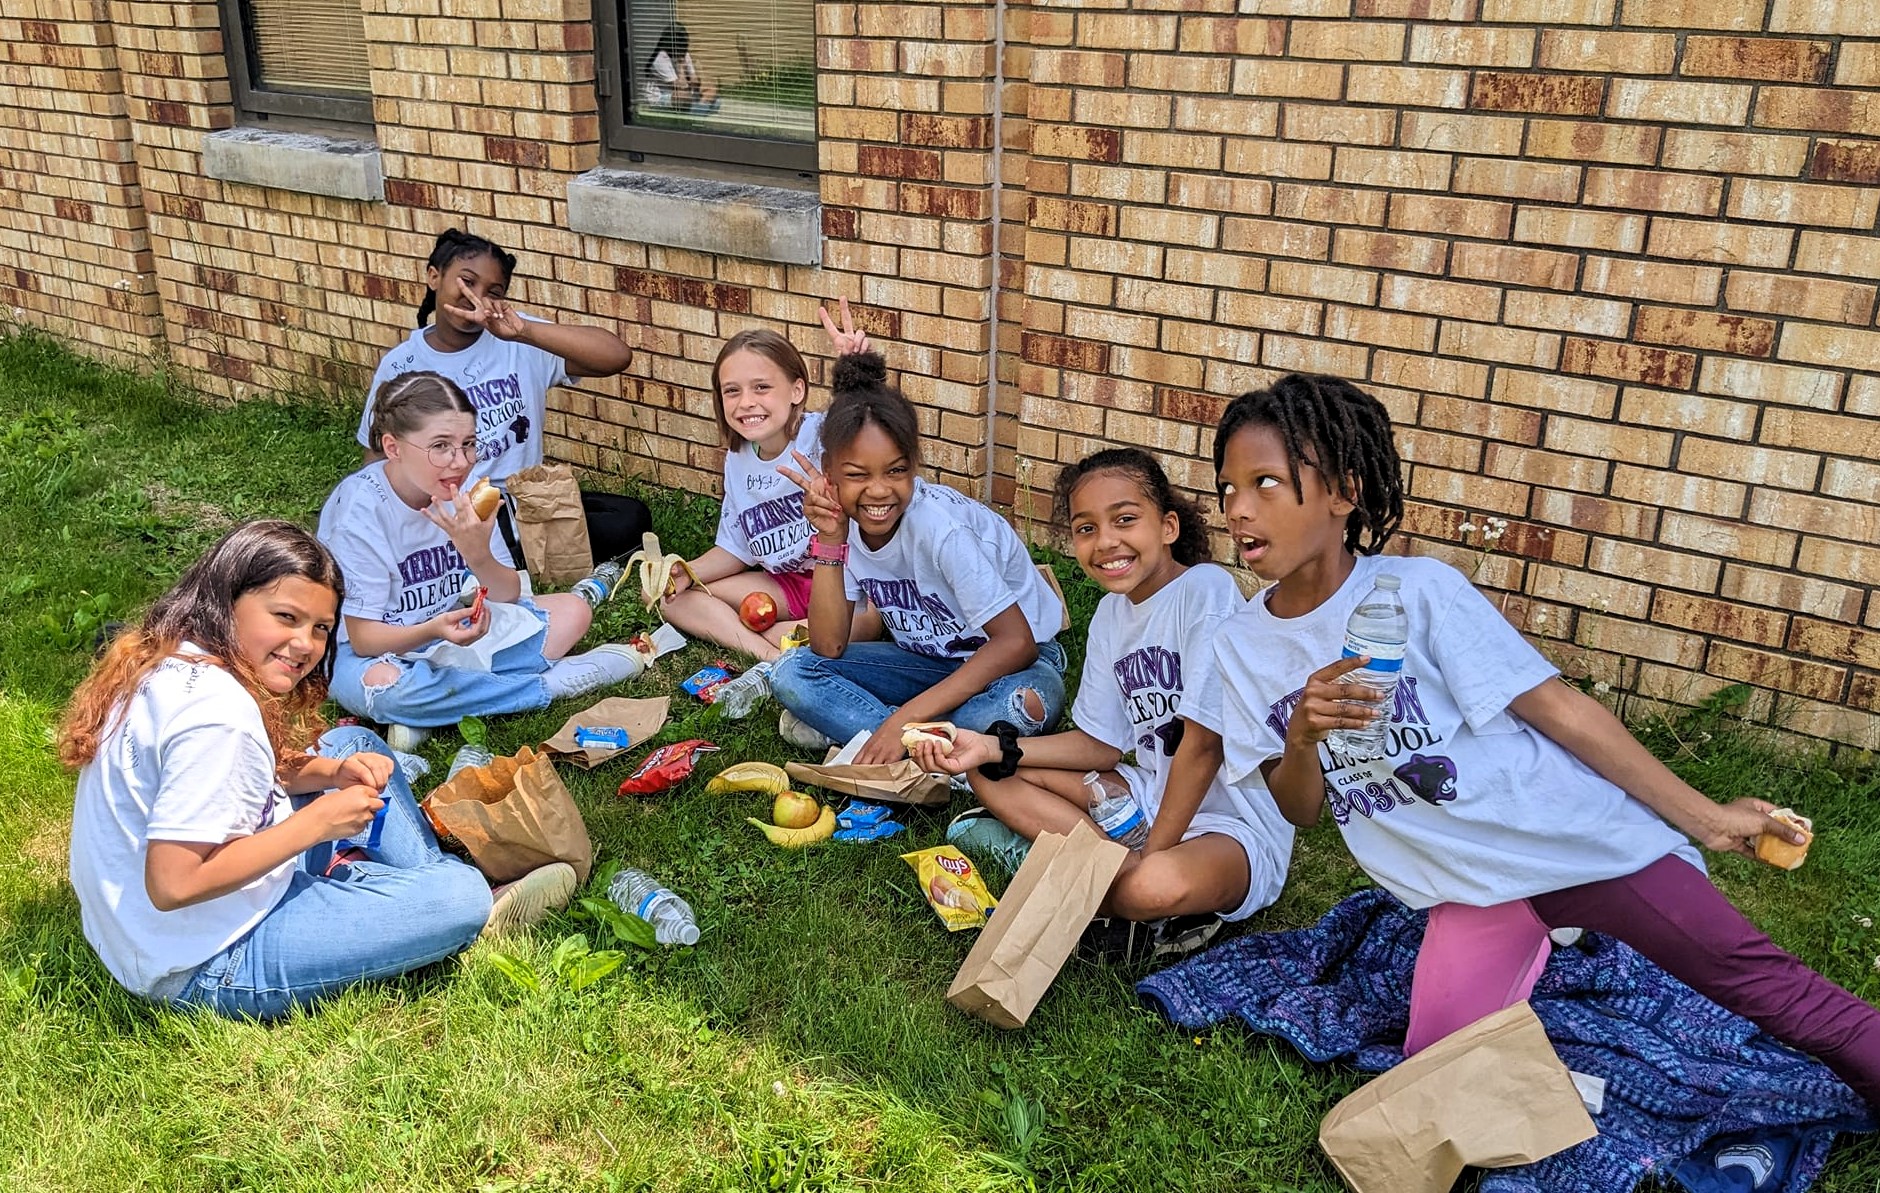 Fairfield Elementary students eating lunch outside on a sunny day.